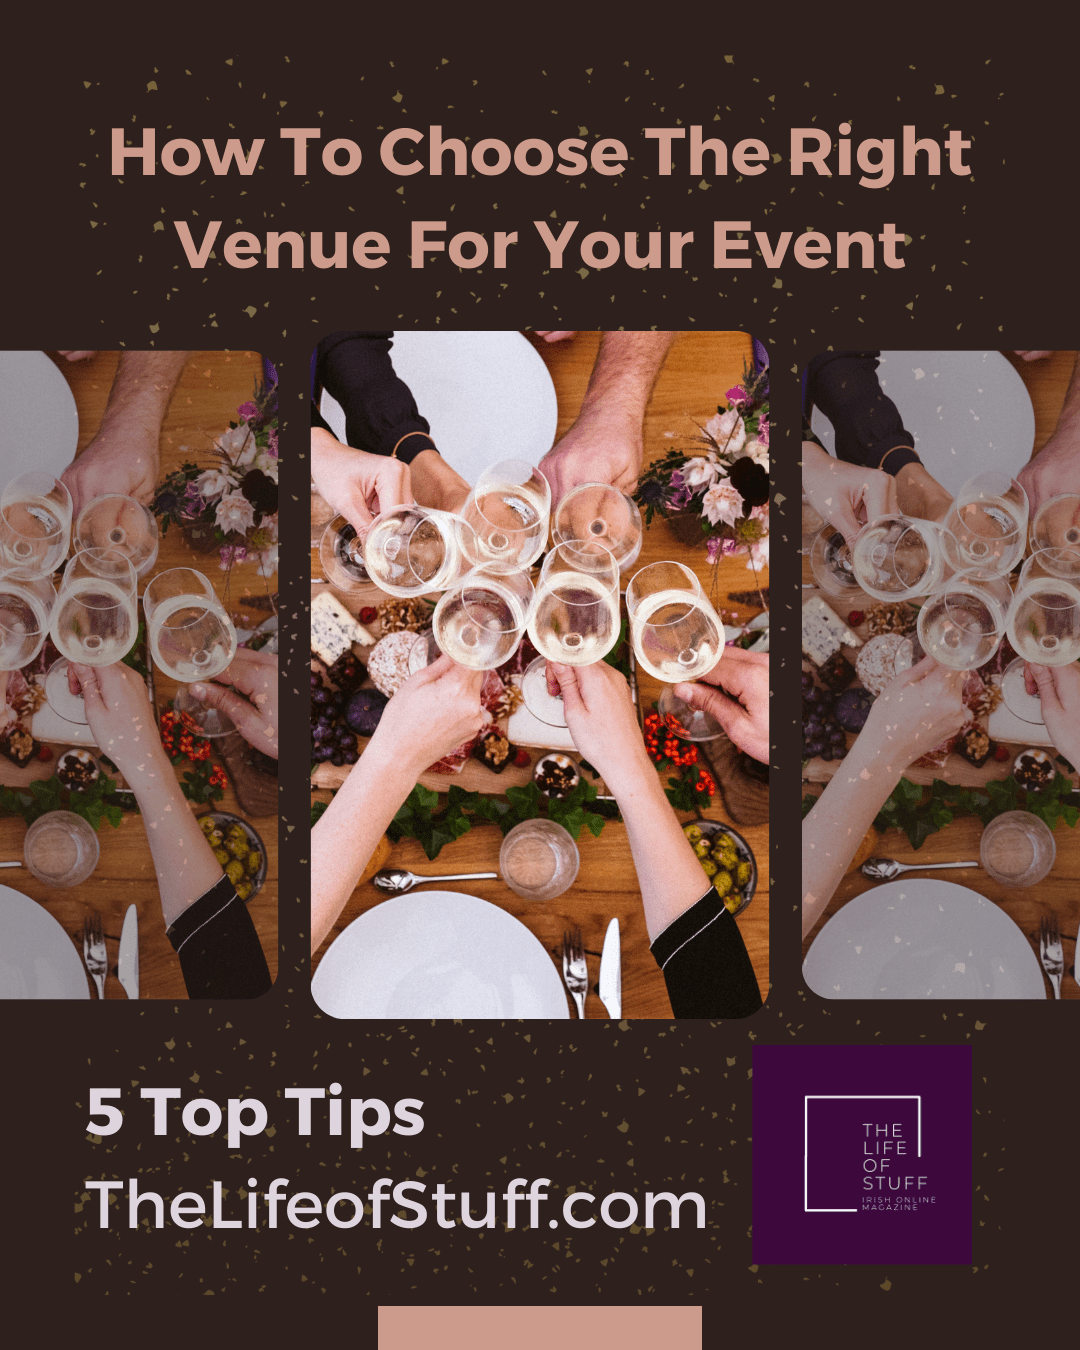 5 Top Tips - How To Choose The Right Venue For Your Event - The Life of Stuff